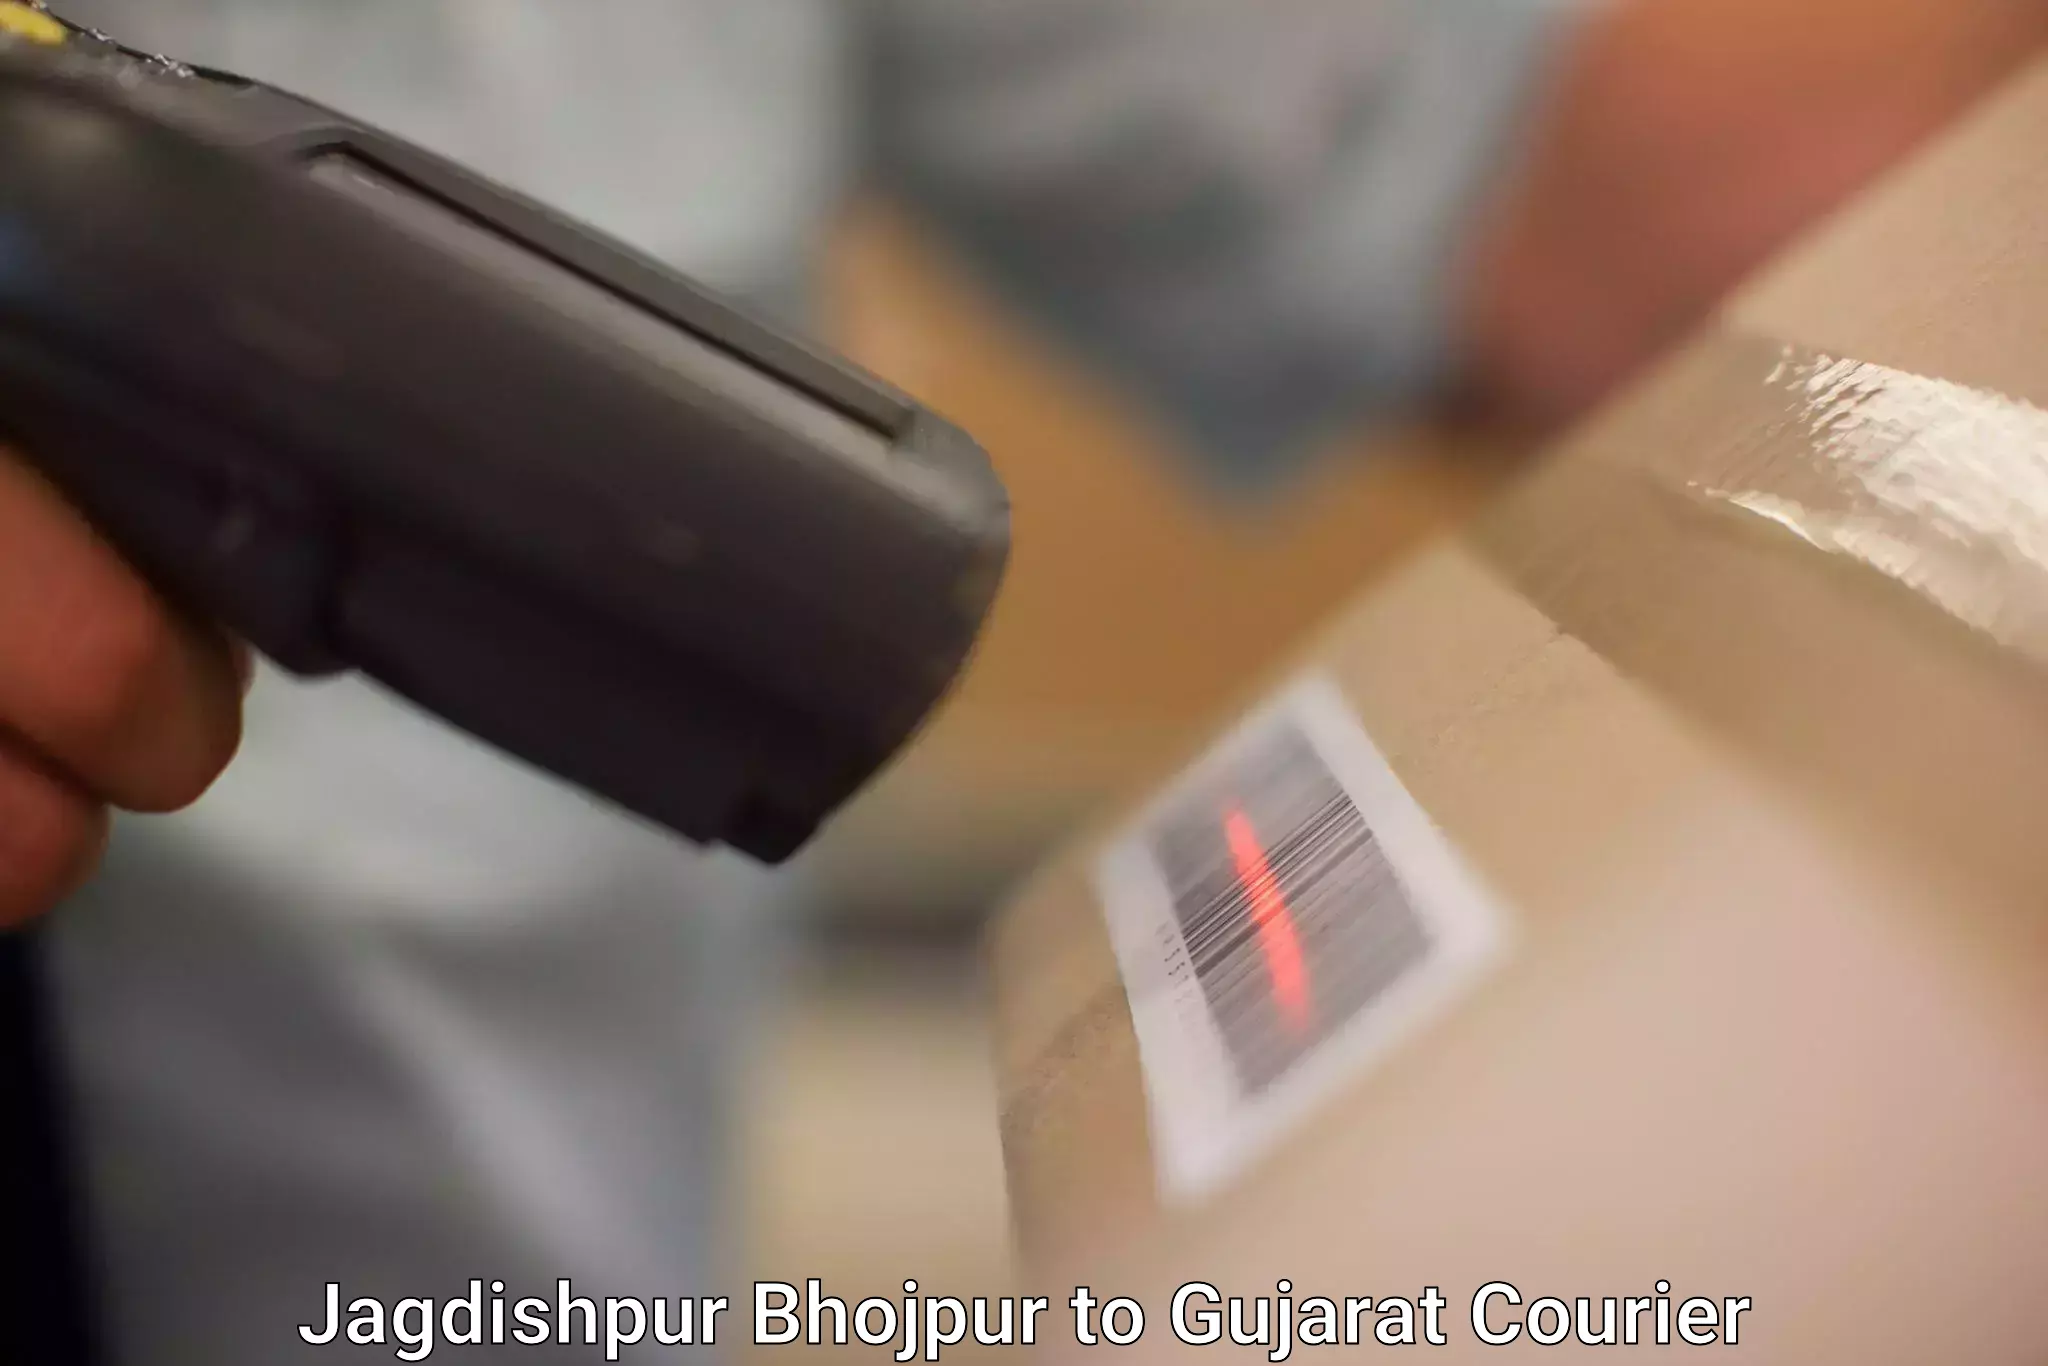 Secure shipping methods Jagdishpur Bhojpur to Ahwa